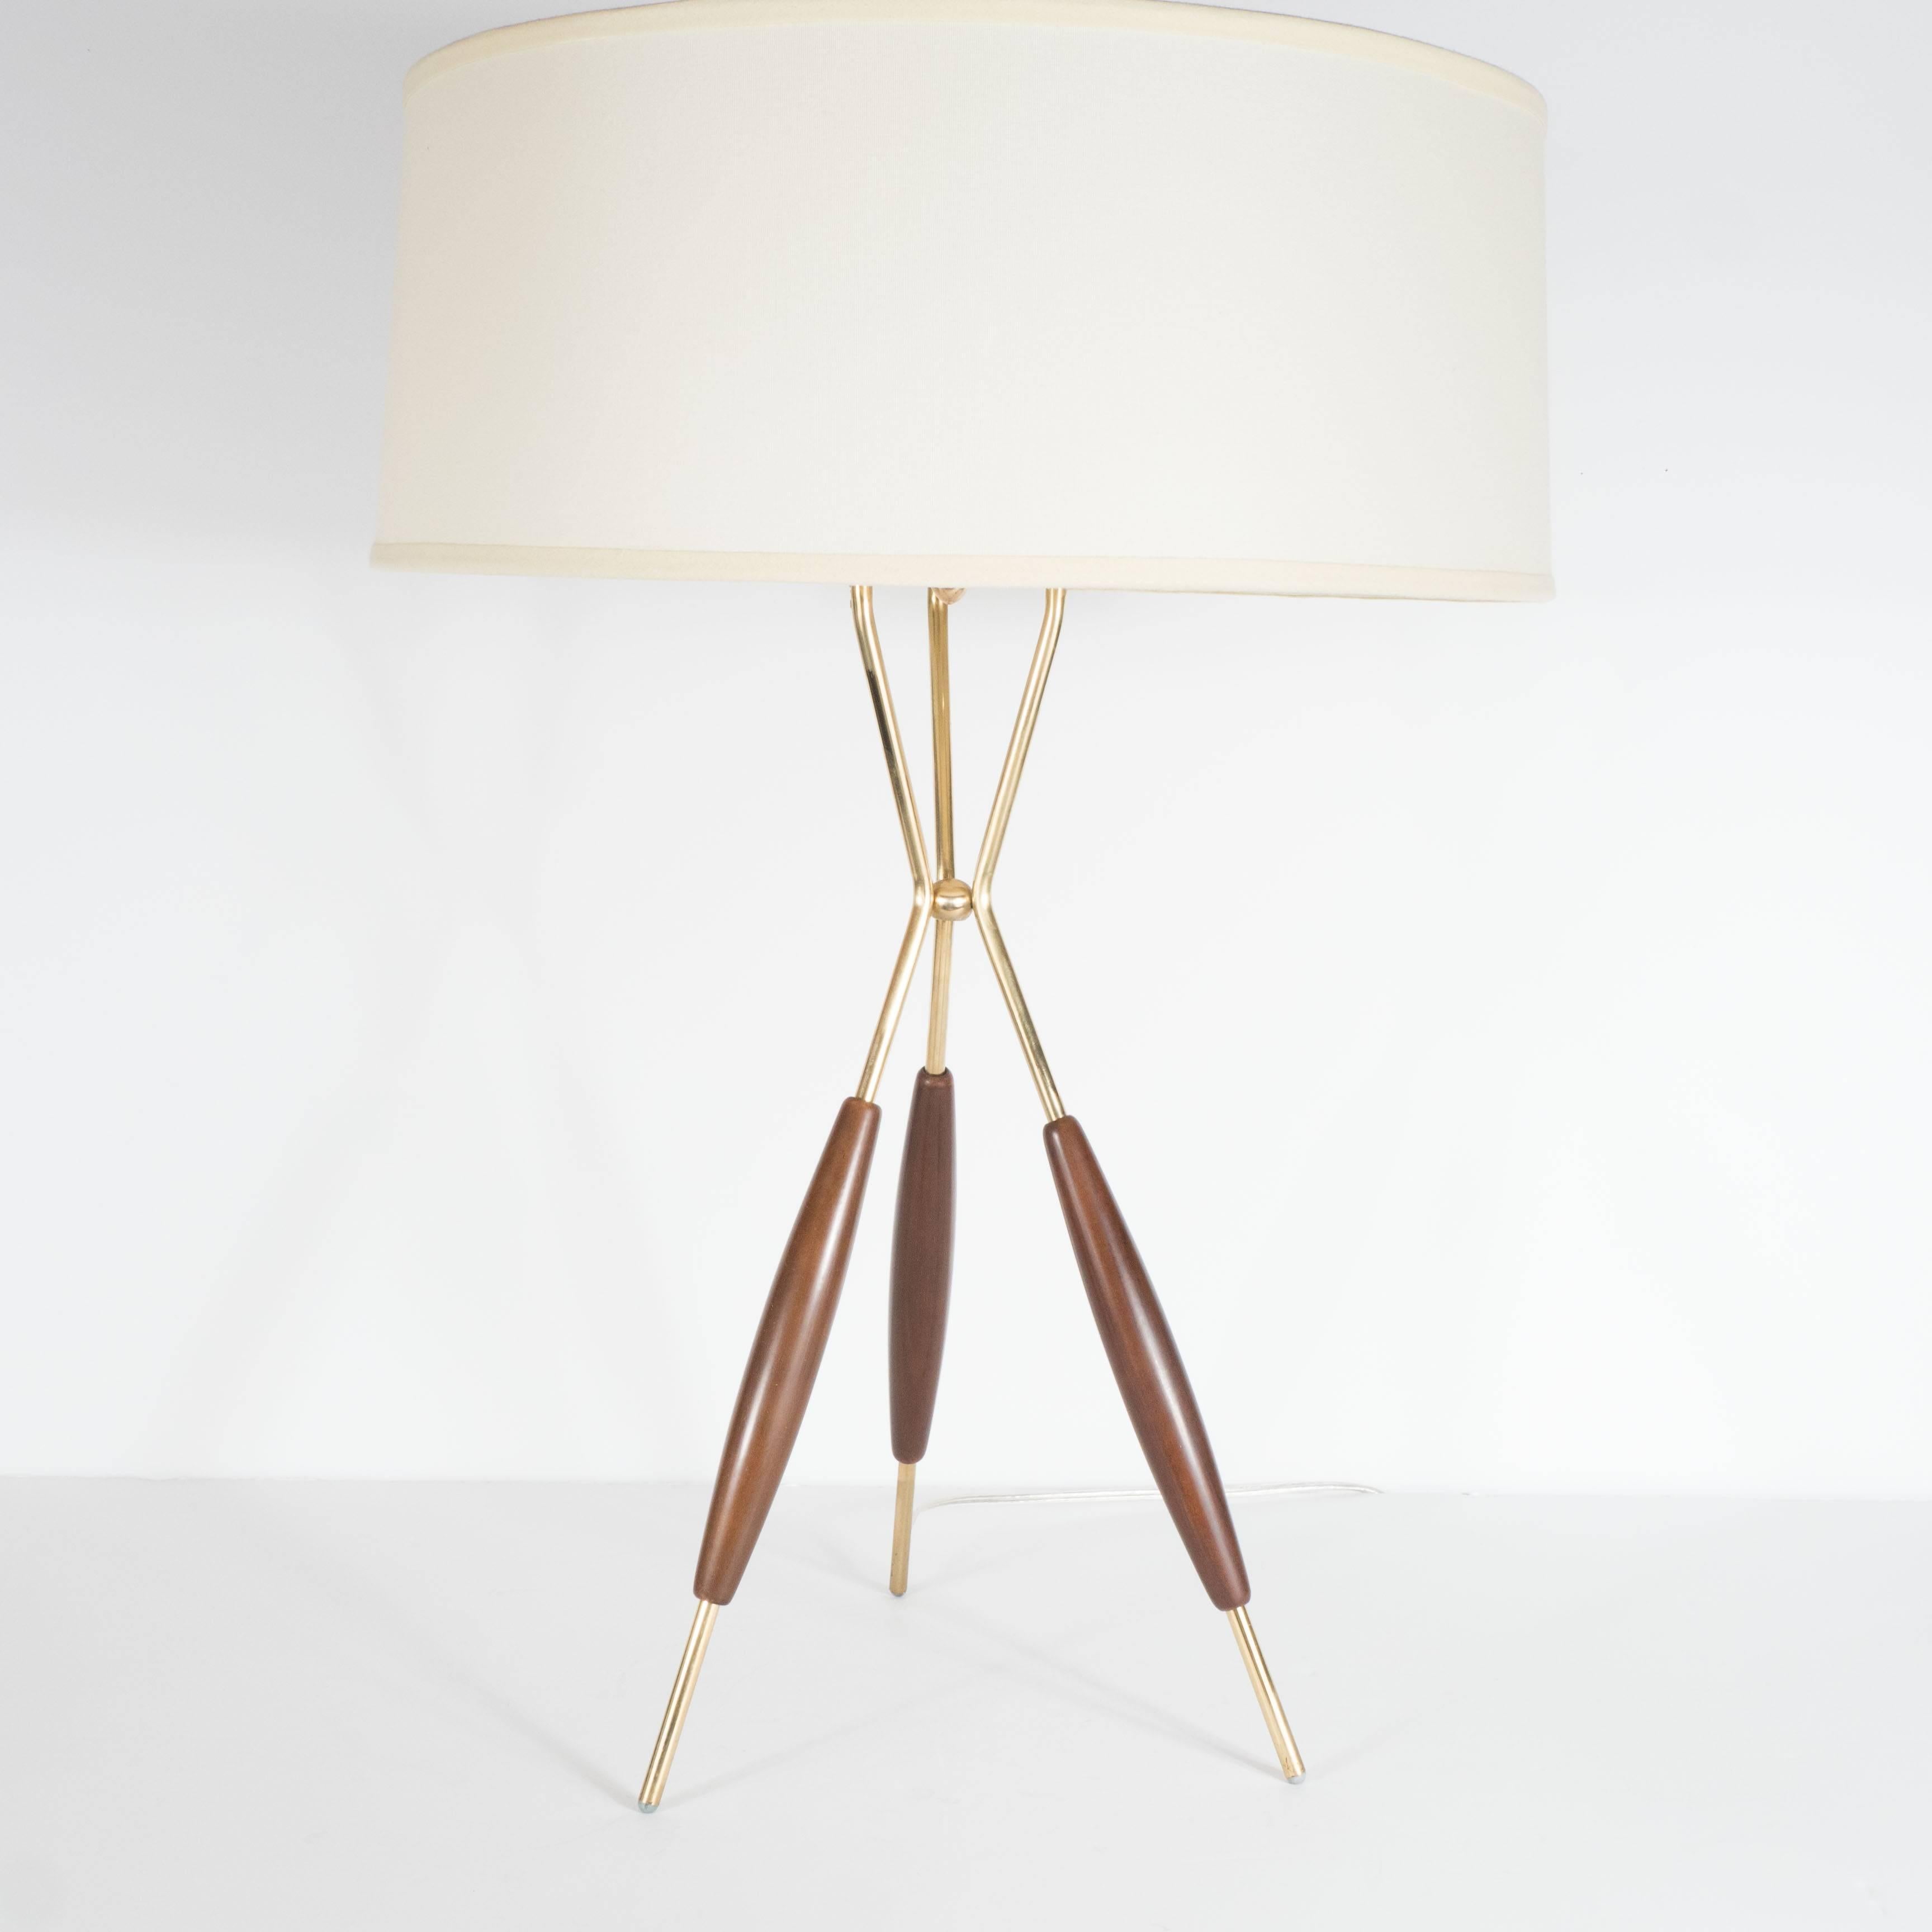 A pair of Mid-Century tripod table lamps by Gerald Thurston for Lightolier. Three rounded, polished brass rods meet at a central joining point and stem back out to support a custom fitted shade. Hand-rubbed walnut covers adorn each rod. A diffuser